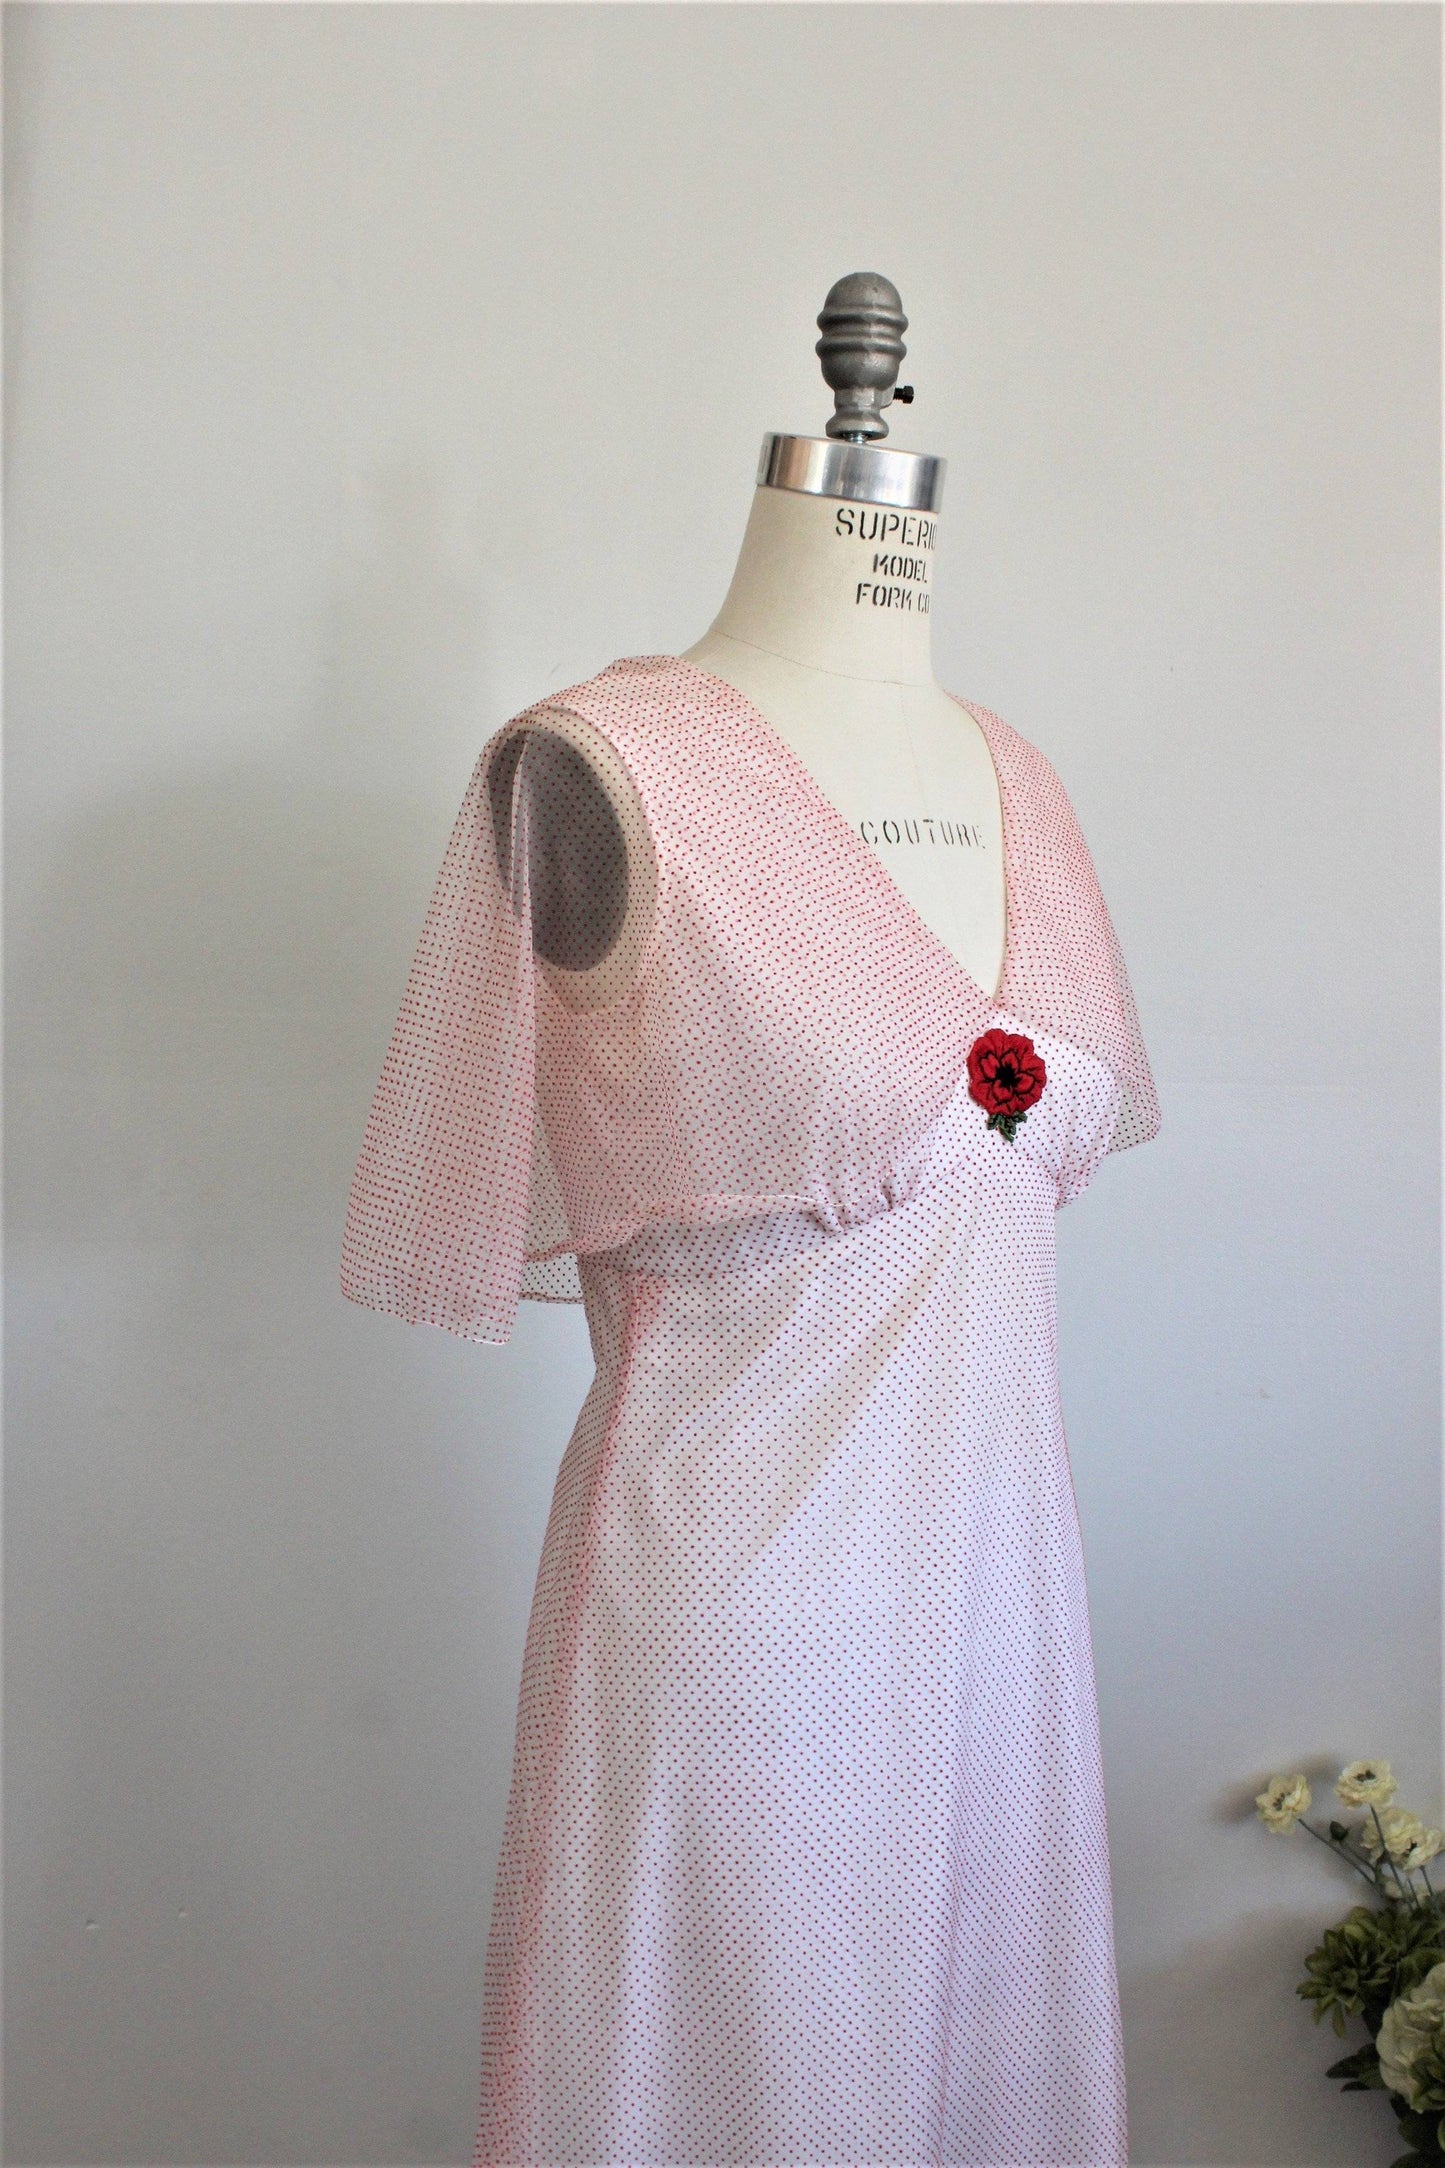 Vintage 1960s Full Length Party Dress, Red and White Polkadots-Toadstool Farm Vintage-1940s Dress,40s Clothing,40s Dress,40s Formal Dress,Full Length Dress,Metal Zipper,Party DRess,Polka Dots,Polkadot,Red and White,Ruffled Hem,Vintage,Vintage Clothing,Vintage Dress,Vintage Dresses